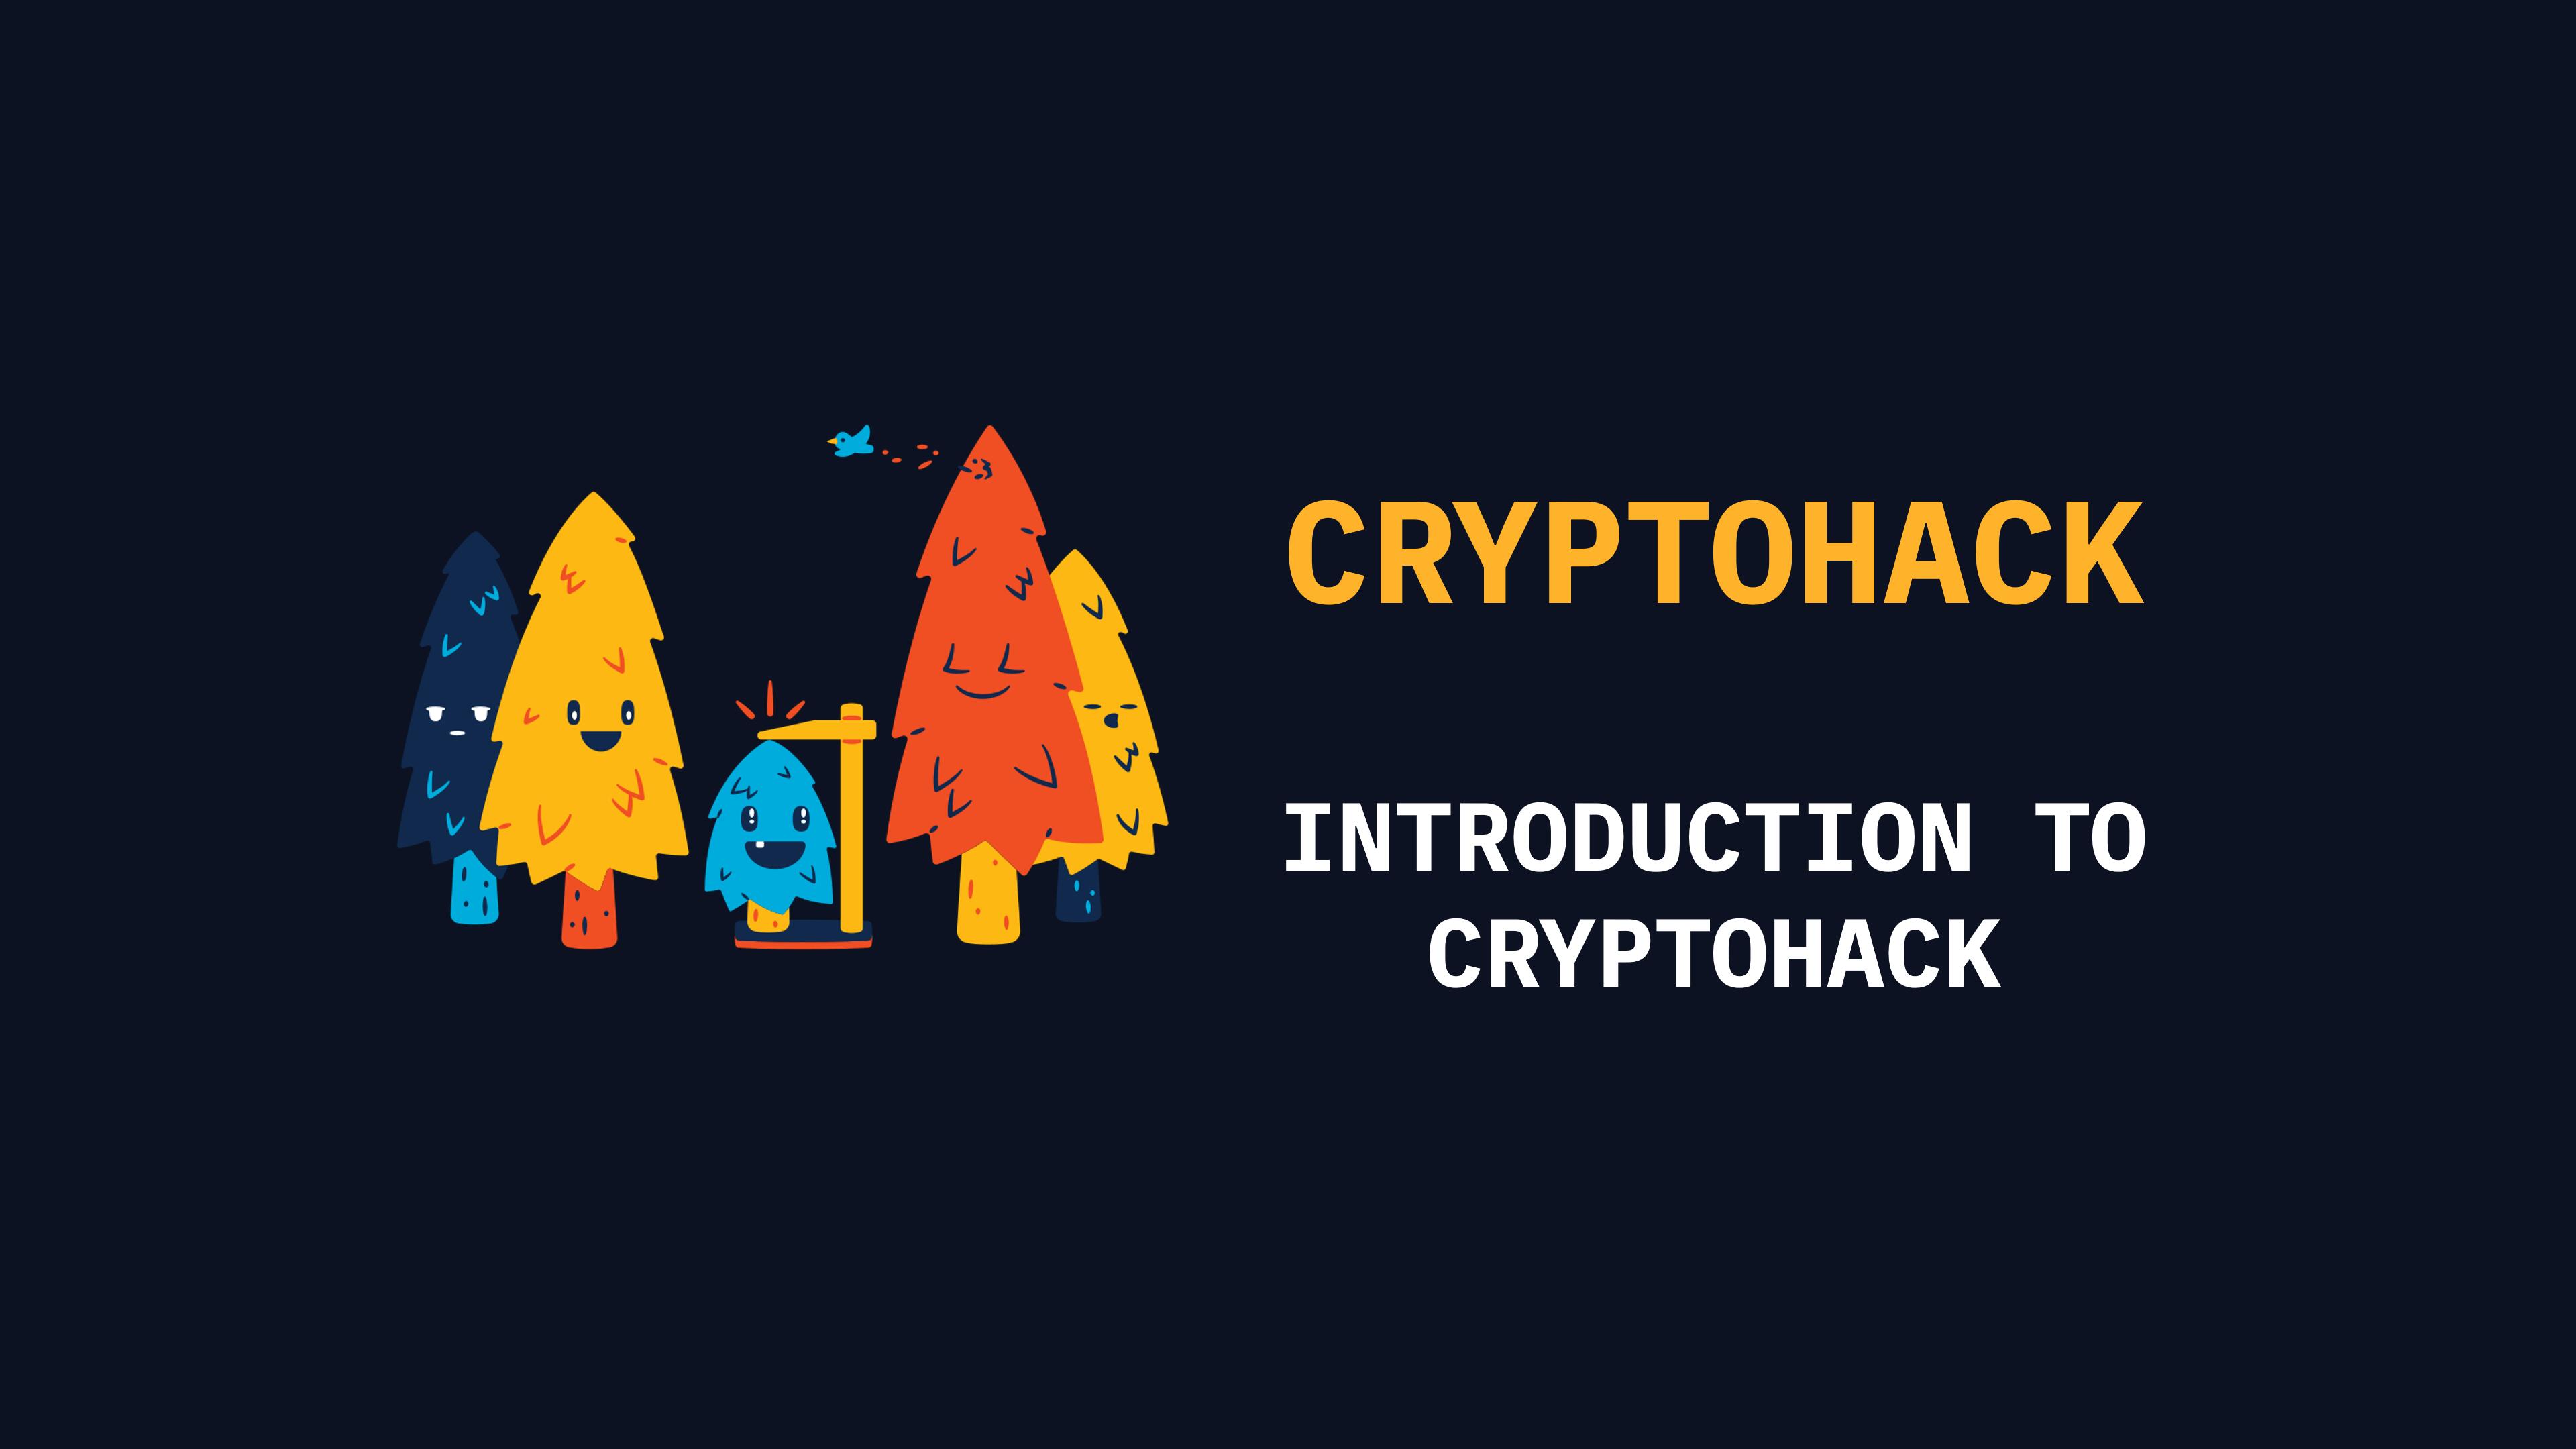 Introduction To Cryptohack